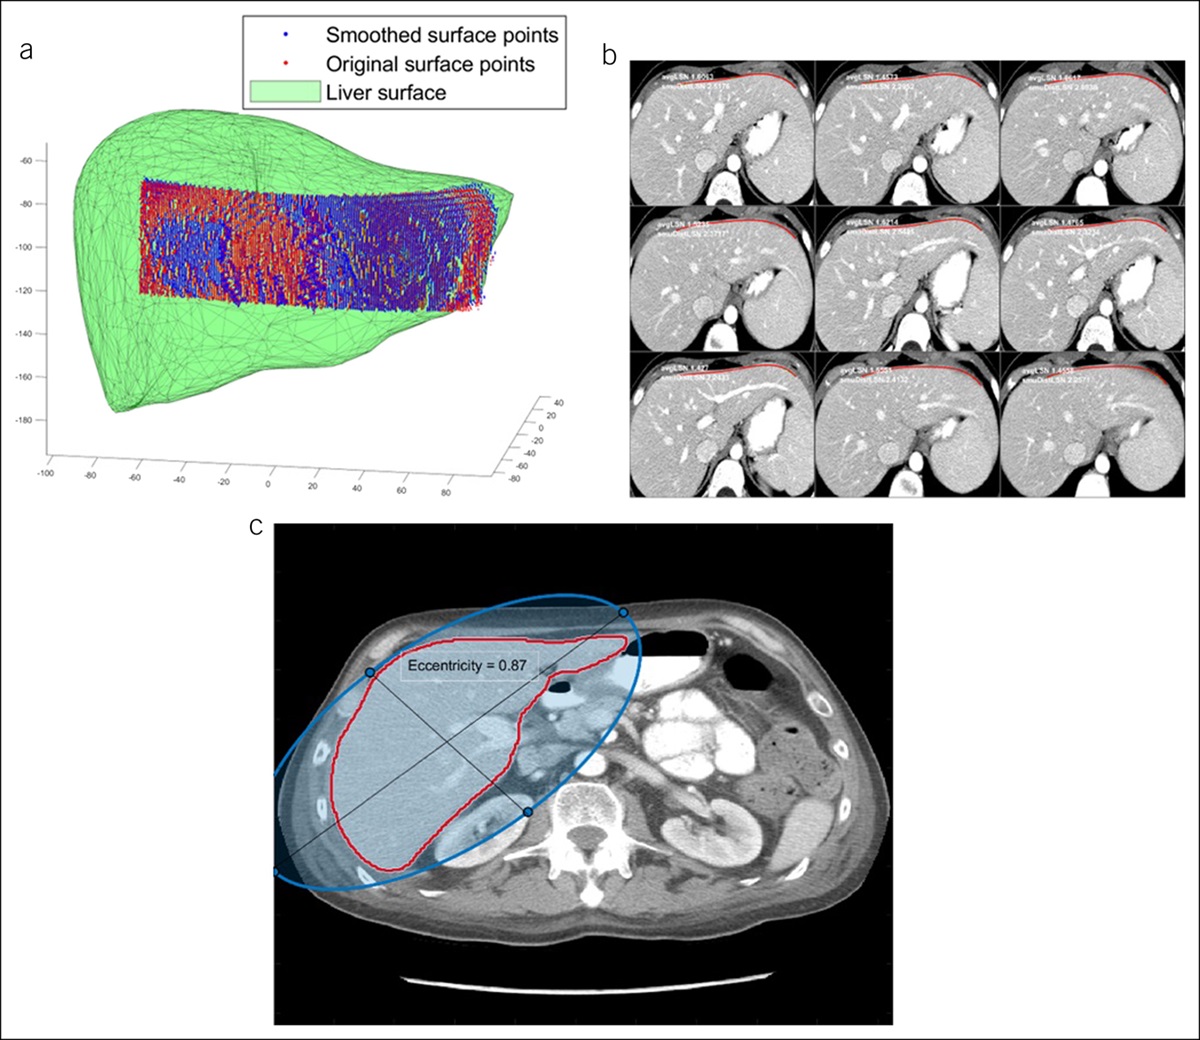 Using Artificial Intelligence to Predict Cirrhosis From Computed Tomography Scans